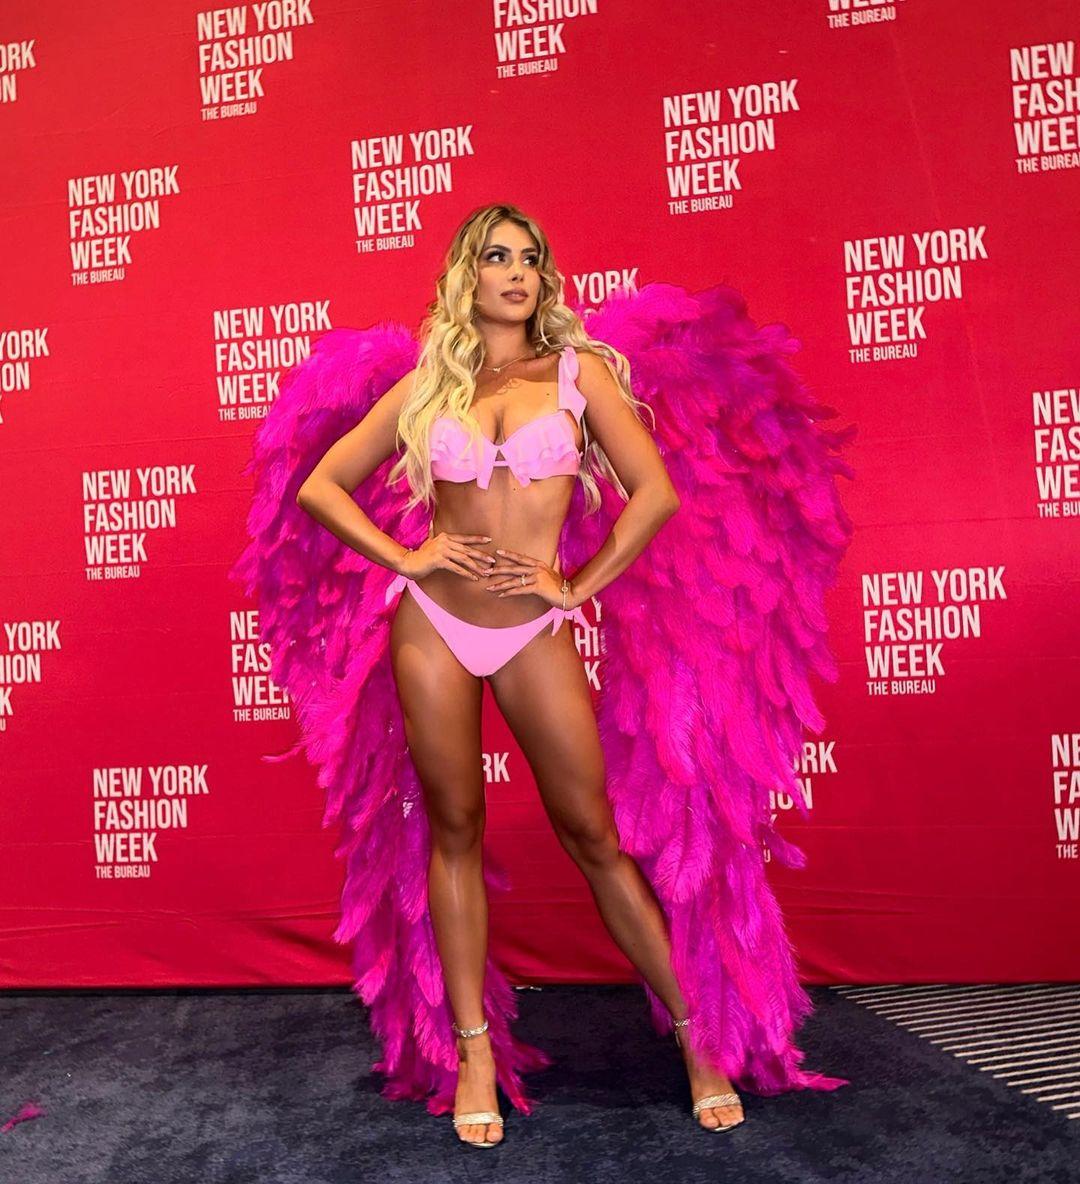 Andreea Dragoi walks at New York Fashion Week in a pink swimsuit and angel wings.